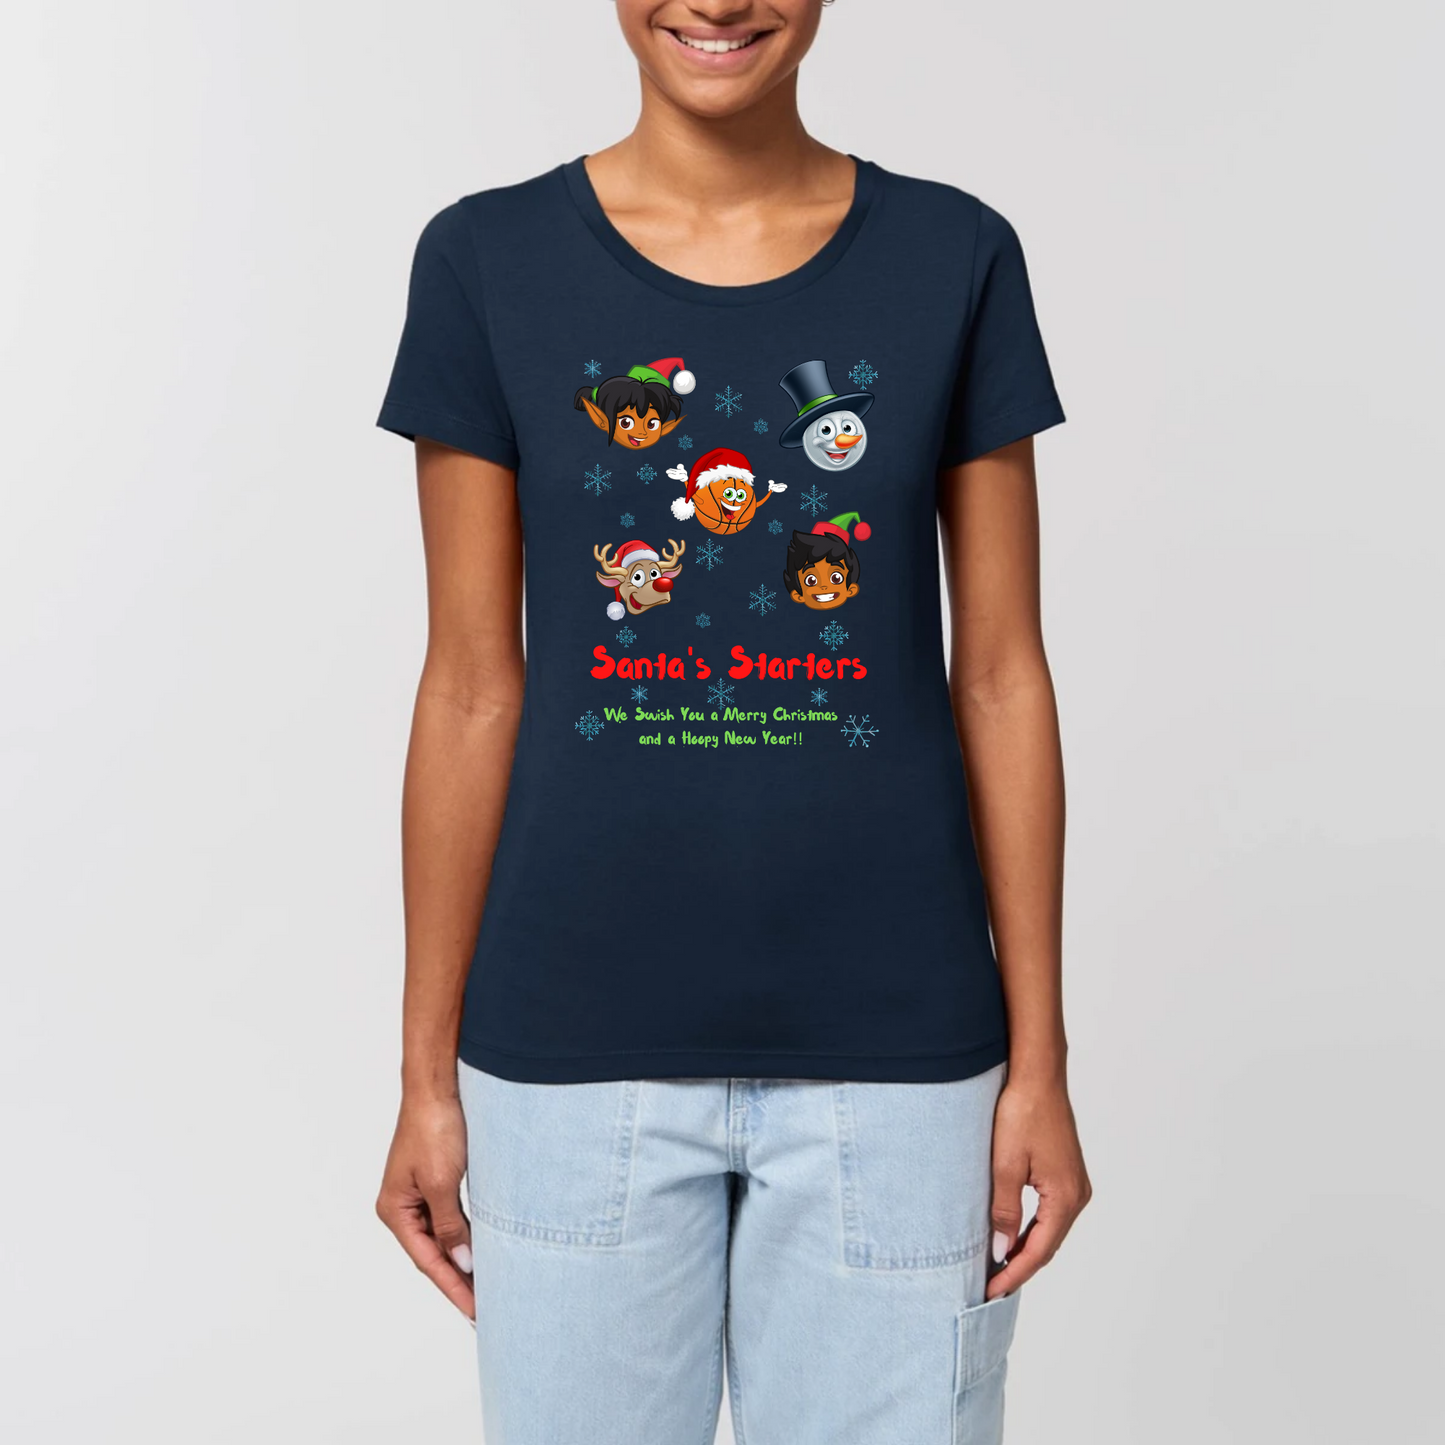 Model wearing a christmas t-shirt with a print design on front, The design has 5 cartoon character heads of 2 elves, a snowman, rundolf and a Basketball face with the heading Santa's starters and sub heading og We swish you a merry Christmas and a hoopy New Year. The t-shirt is Navy